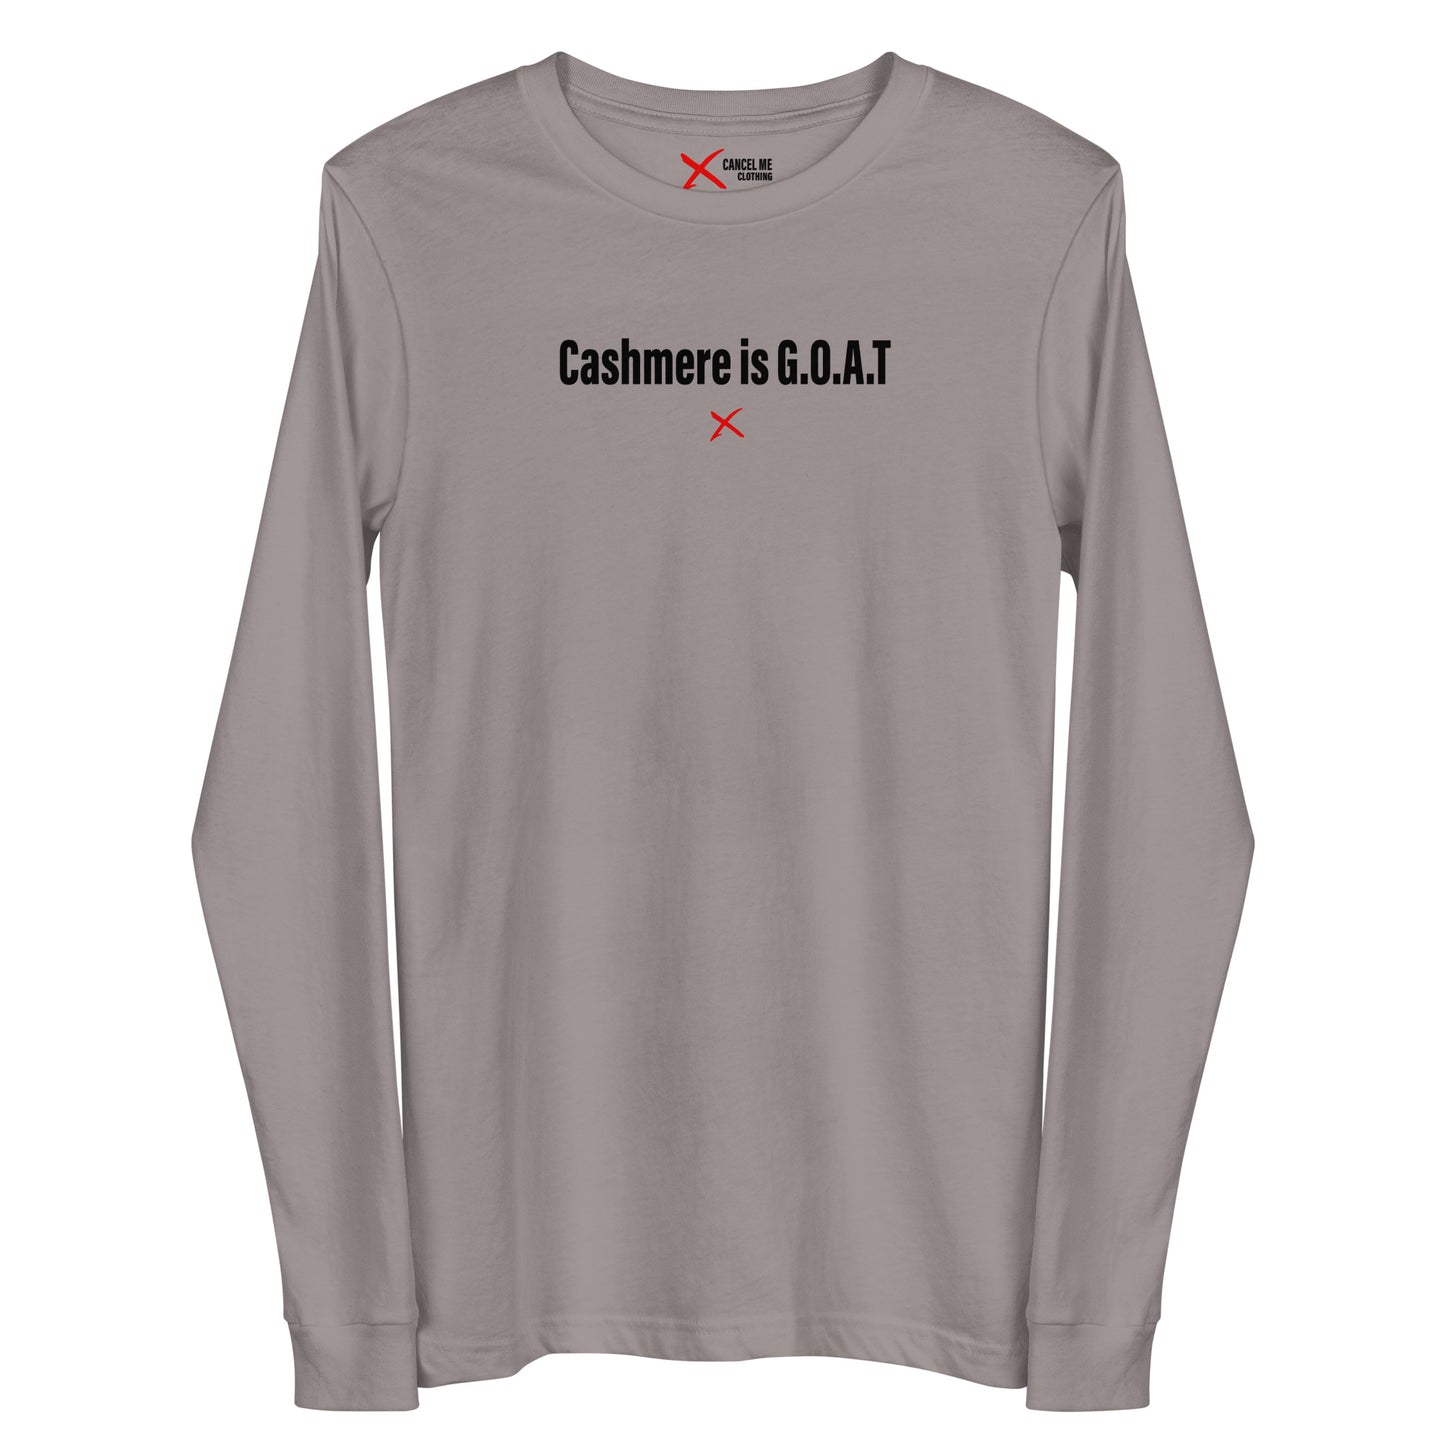 Cashmere is G.O.A.T - Longsleeve